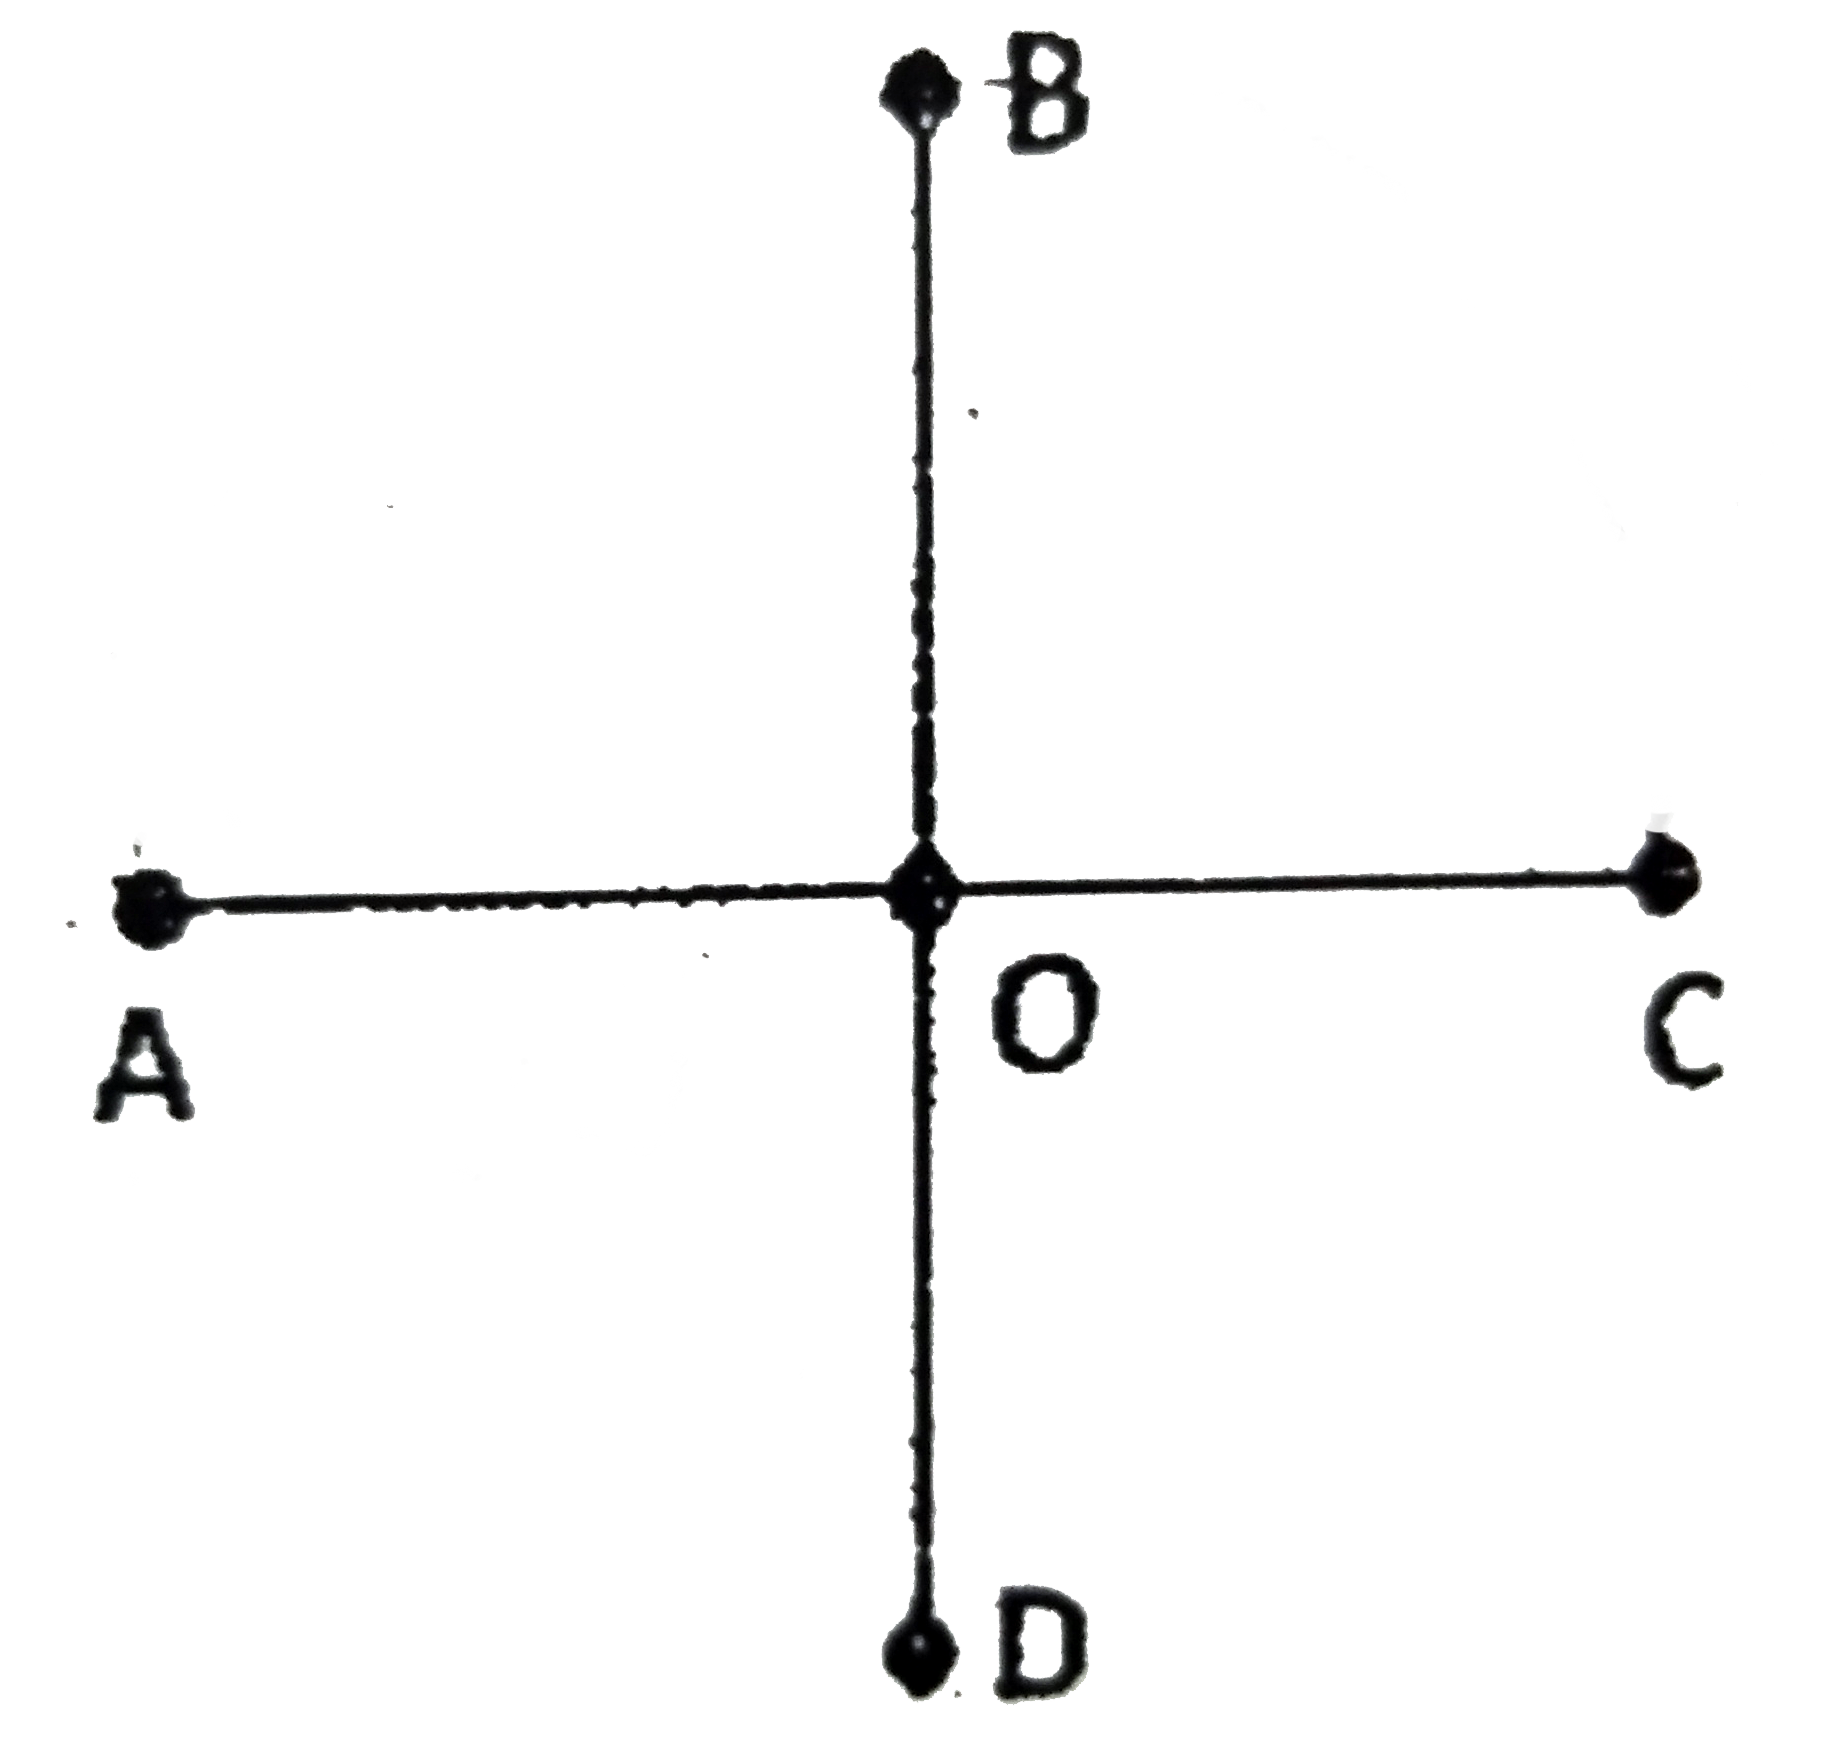 Four identical rods which have thermally insulated lateral surface are joined at point O. Points A,B,C and D are connected to furnace maintained at constant tempertures. If the heat flows into the junction O from A at the rate of 2J/s and from B at 4J/s and flows out towards C is 8J/s. Chosse the correct relation.